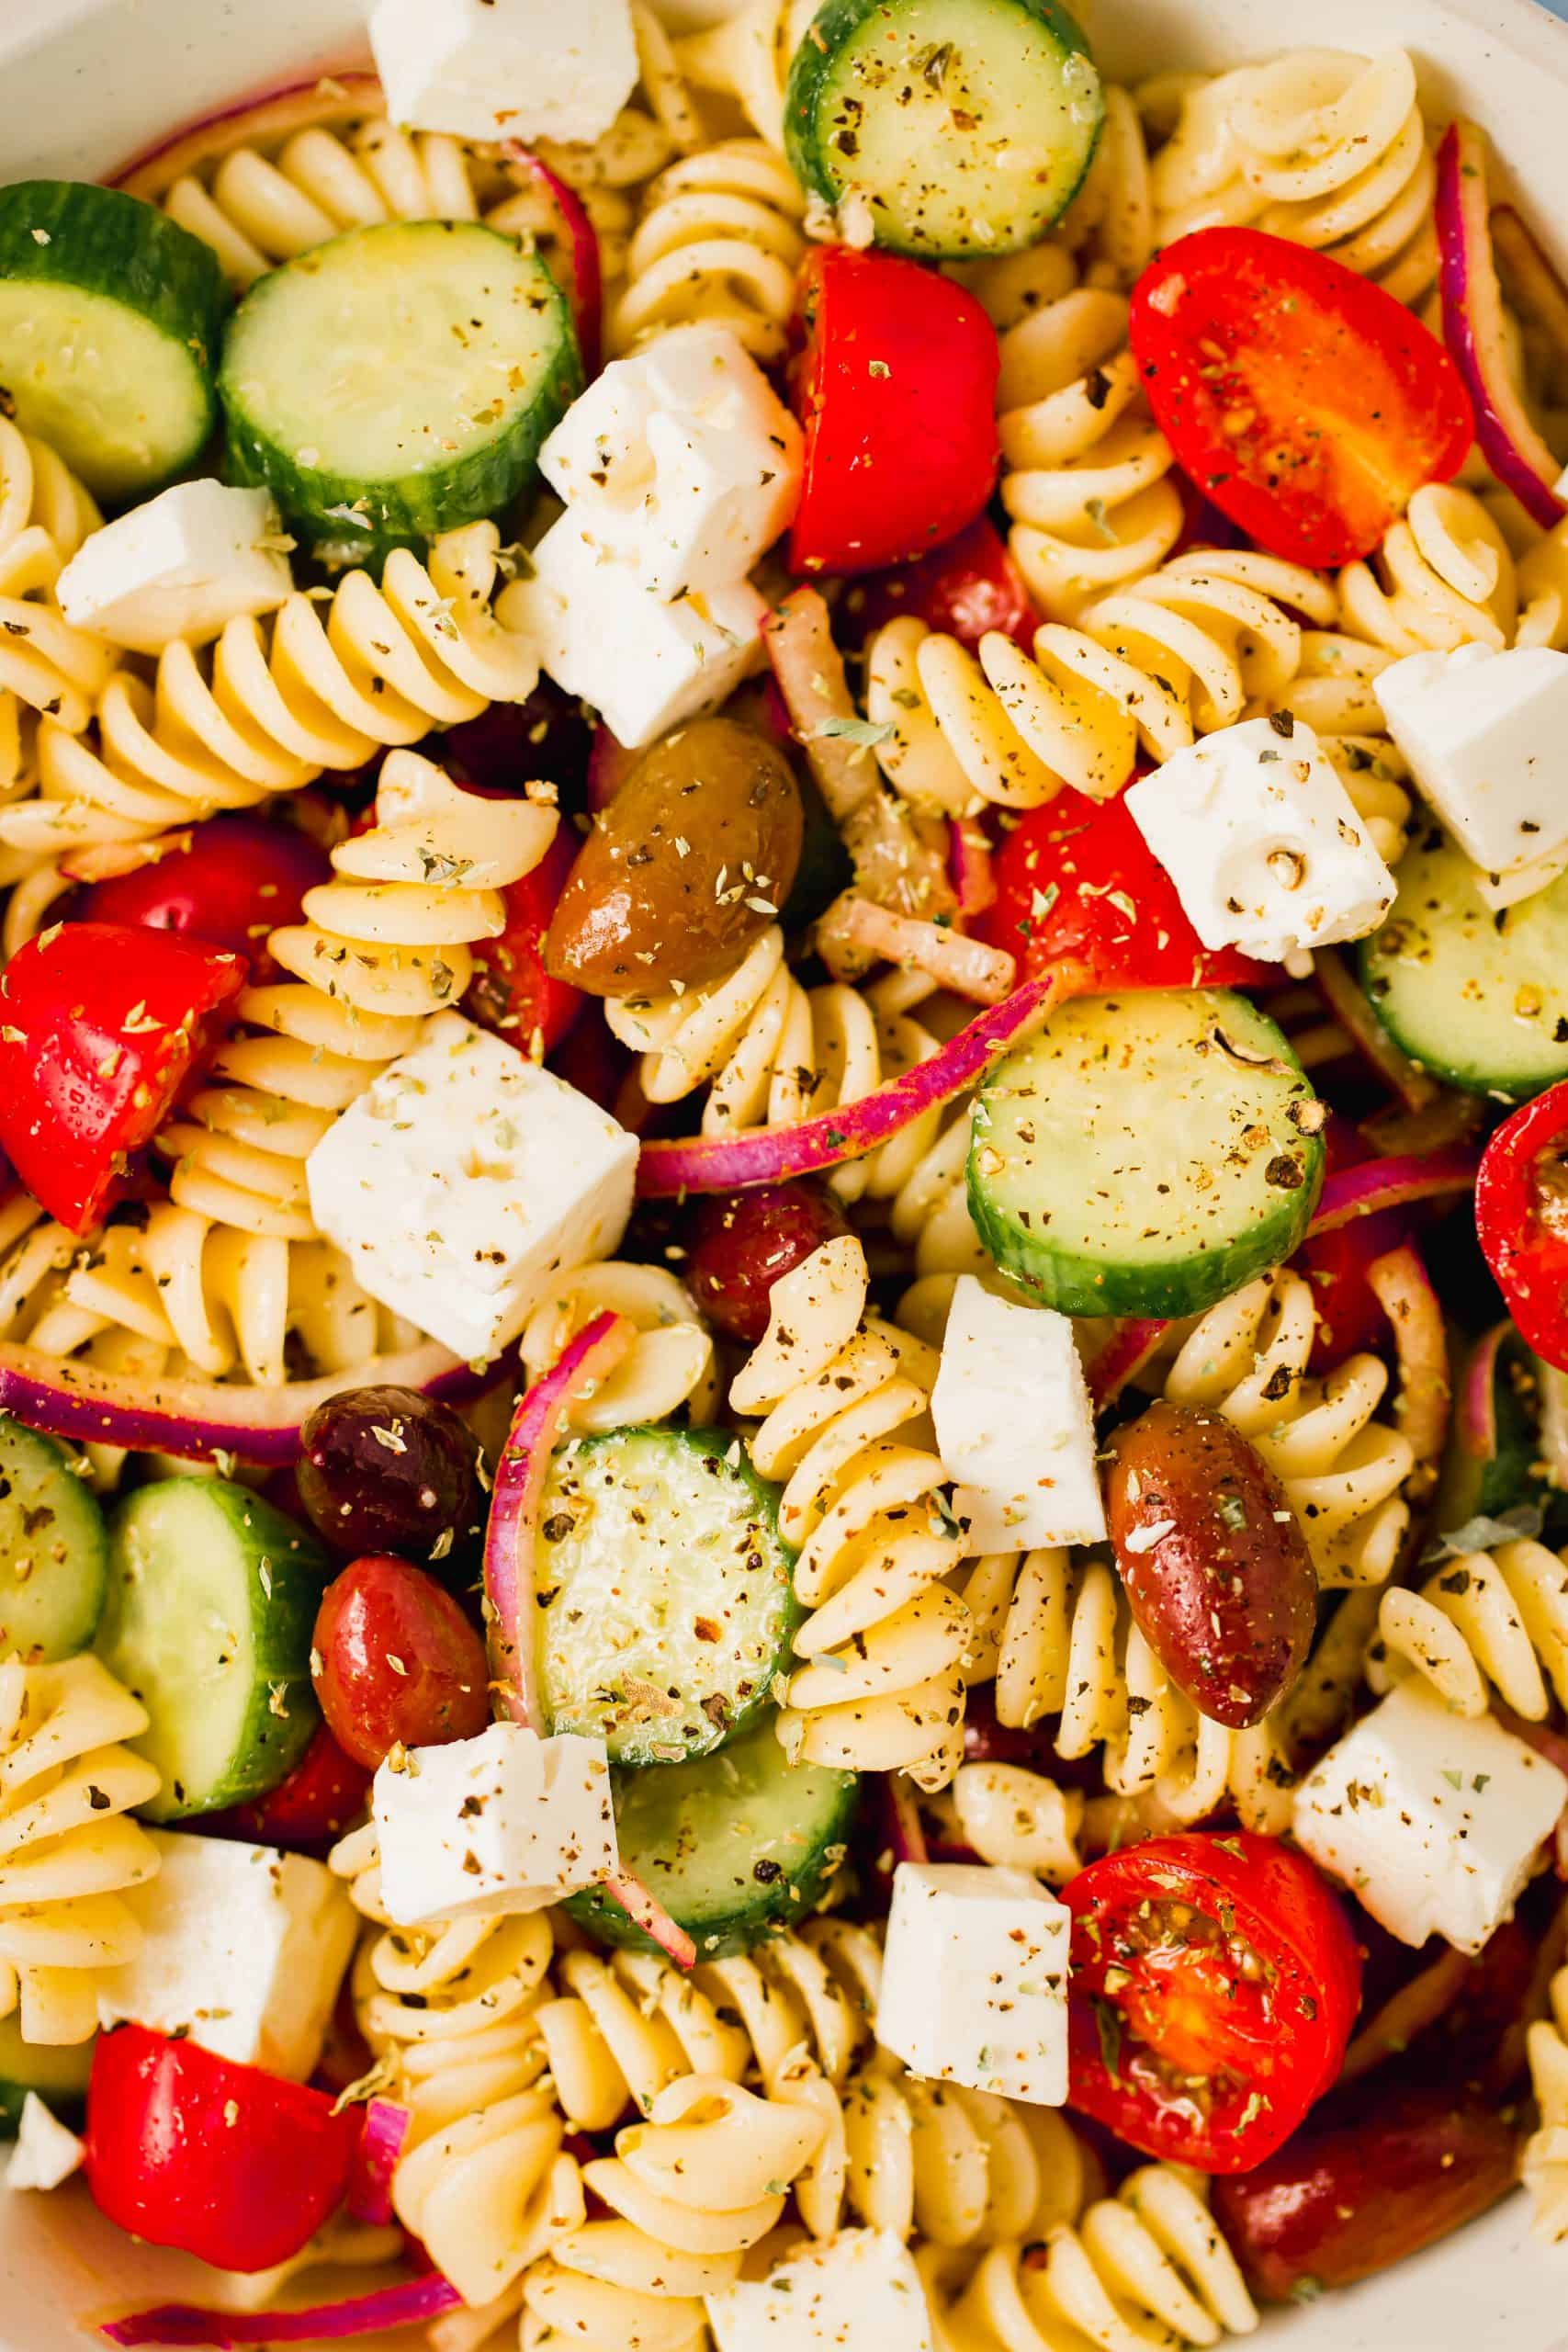 fusilli pasta, cherry tomatoes, cucumbers, feta and red onions in a close up photo